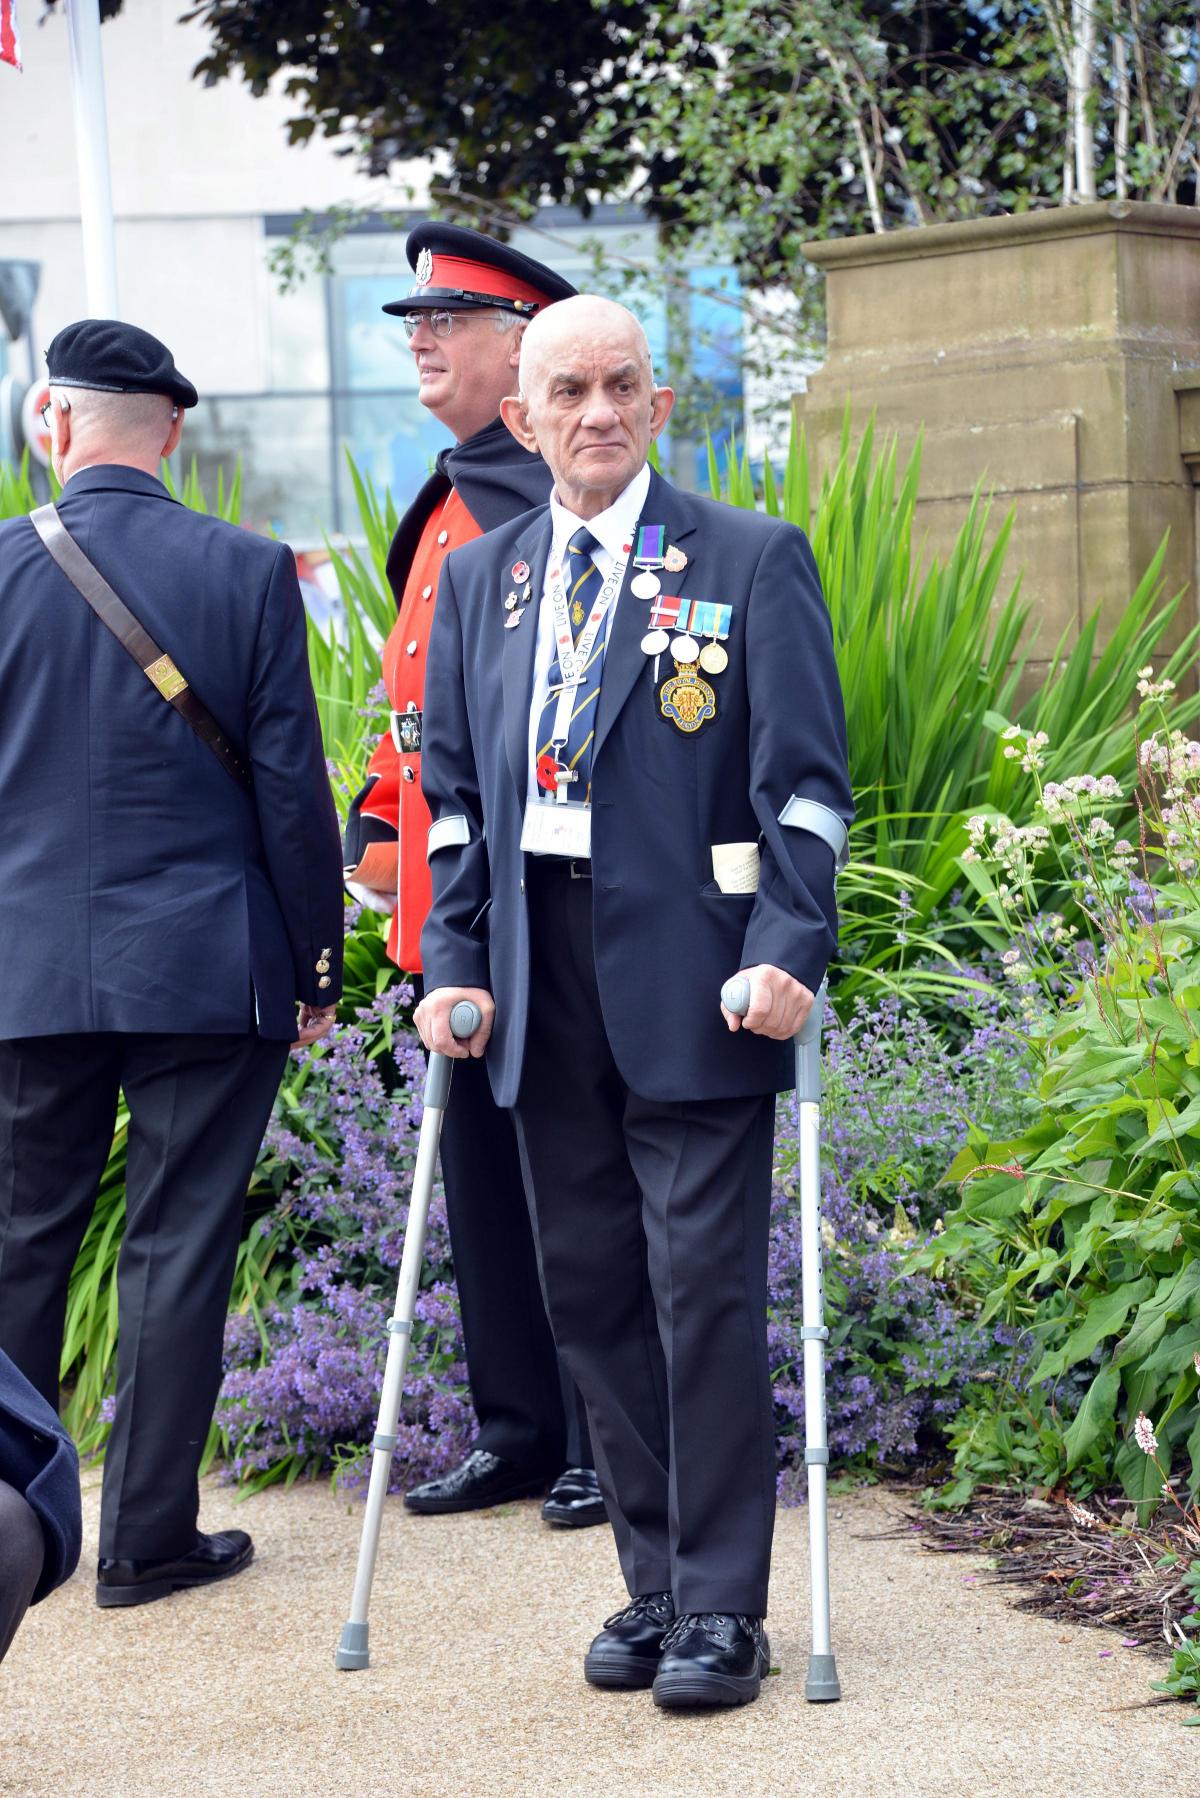 A service to mark The Battle of The Somme in Bradford